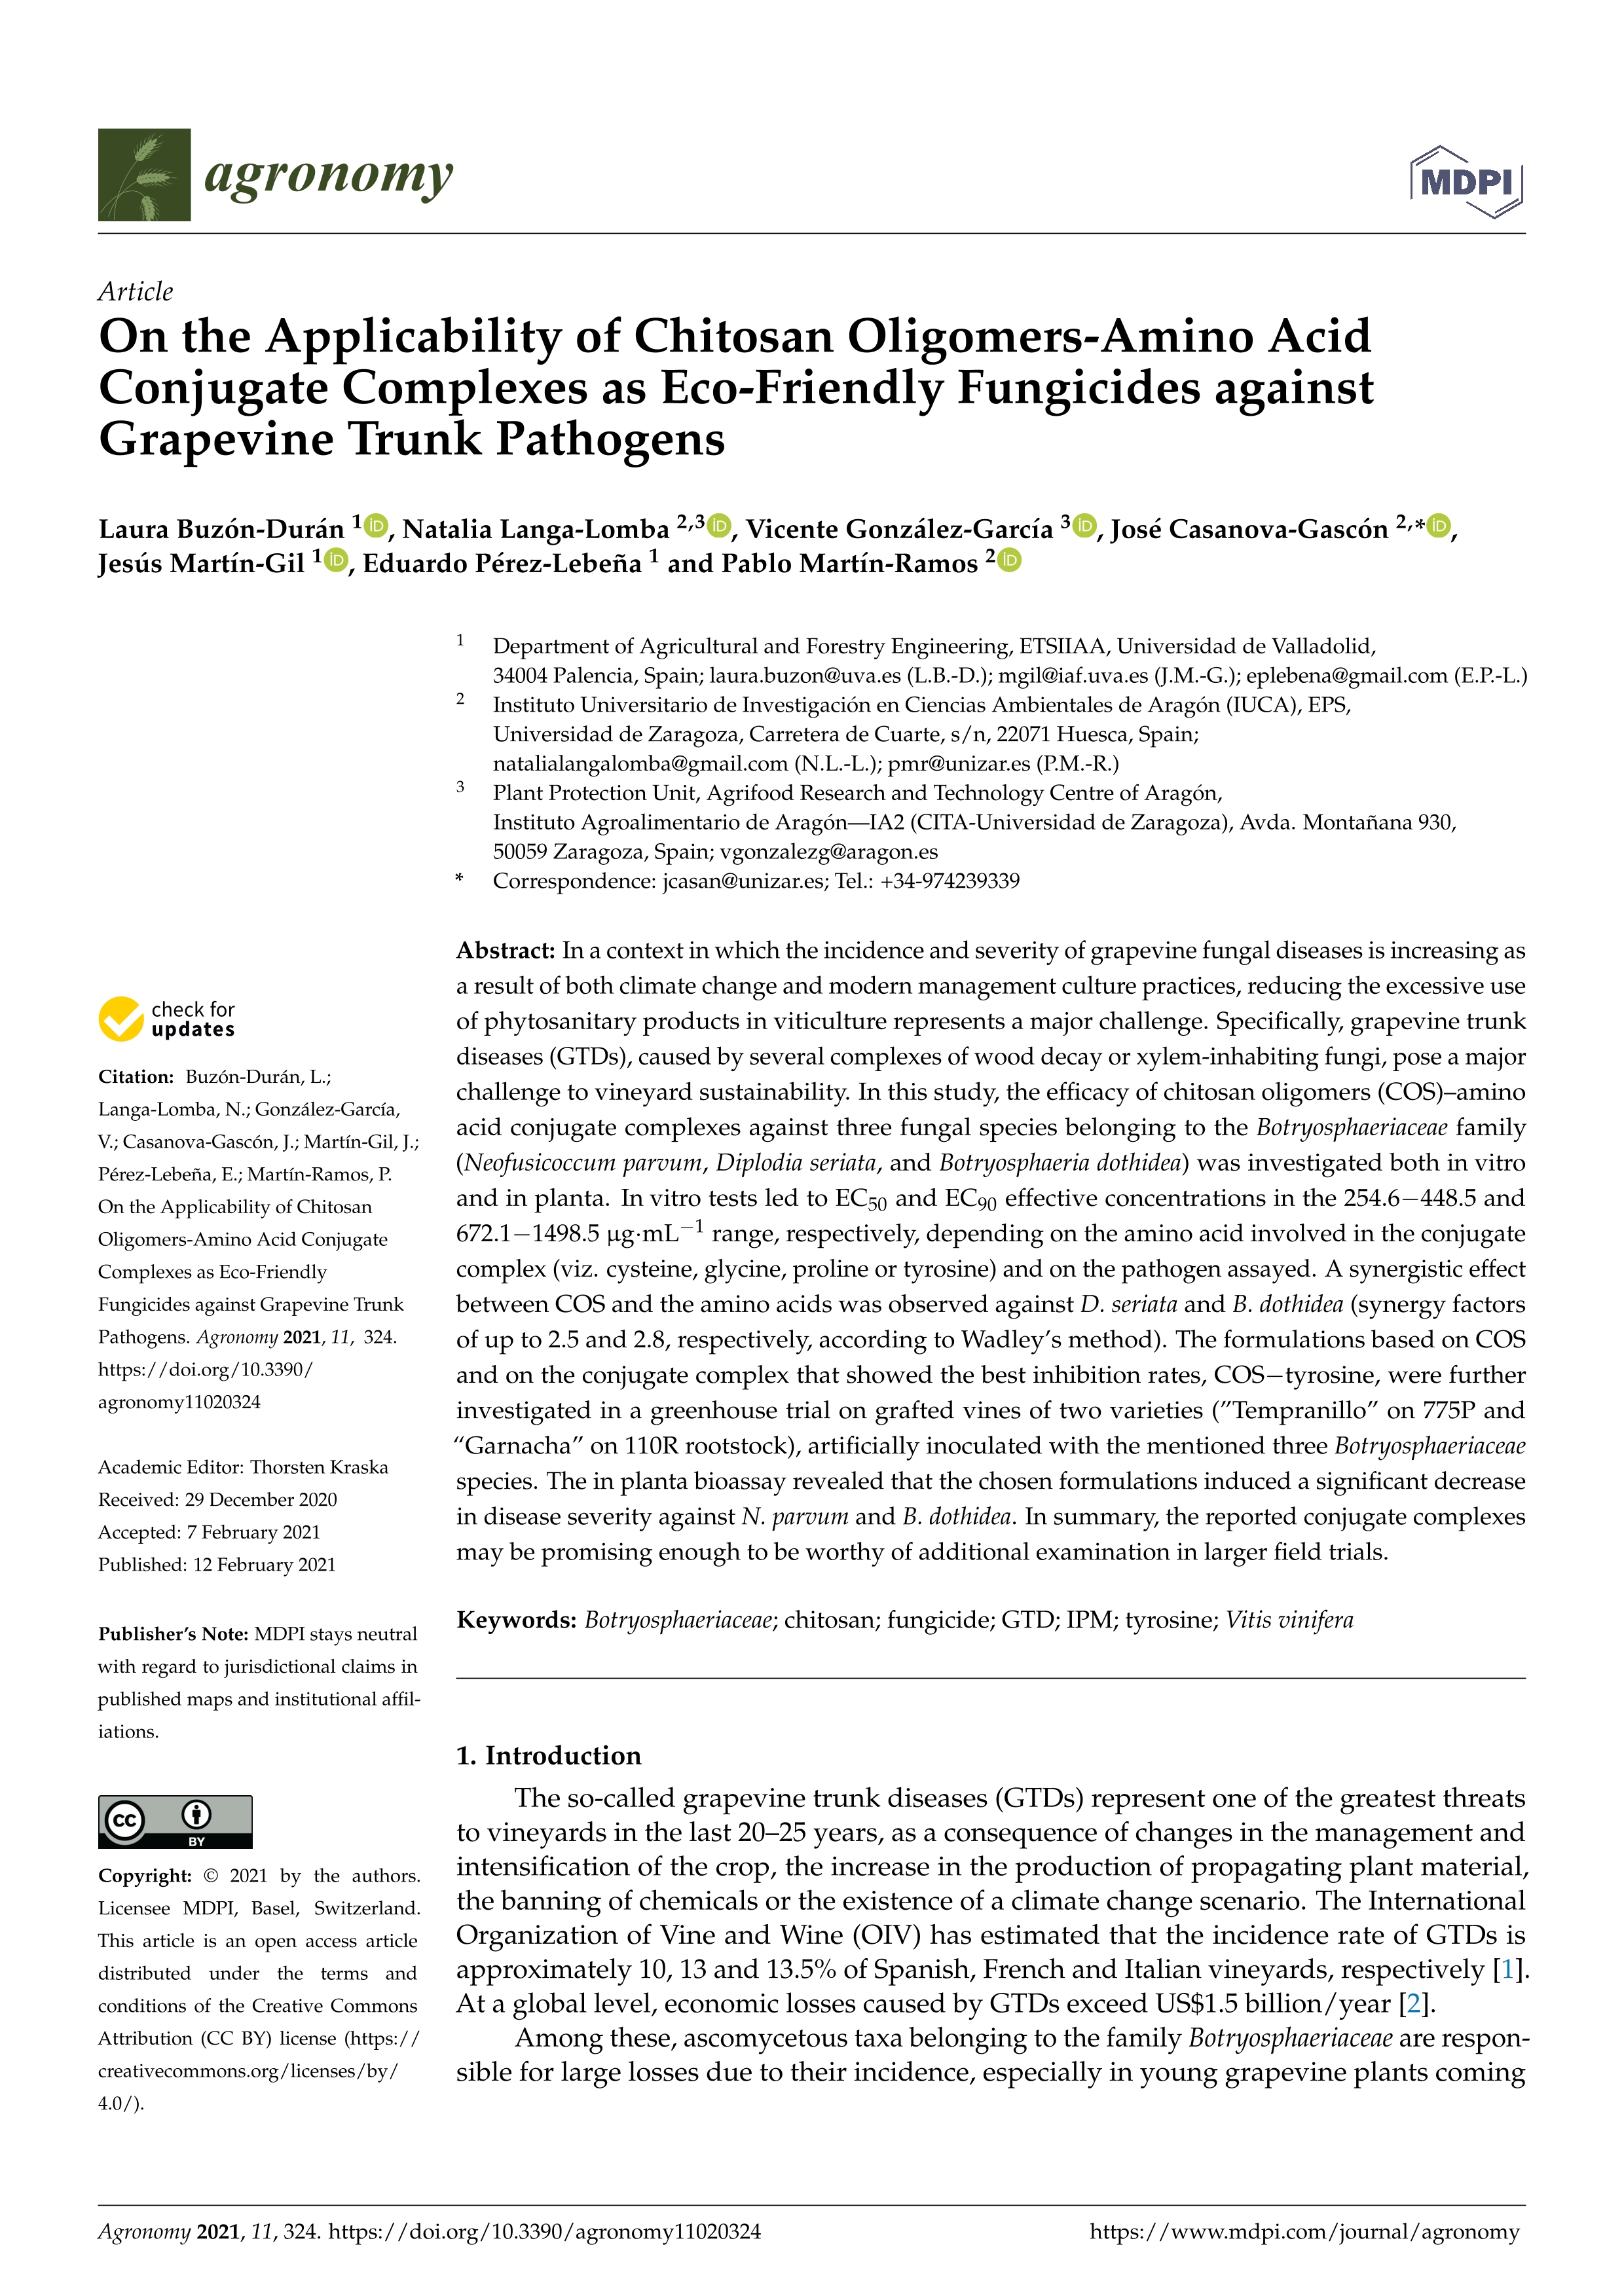 On the applicability of chitosan oligomers-amino acid conjugate complexes as eco-friendly fungicides against grapevine trunk pathogens